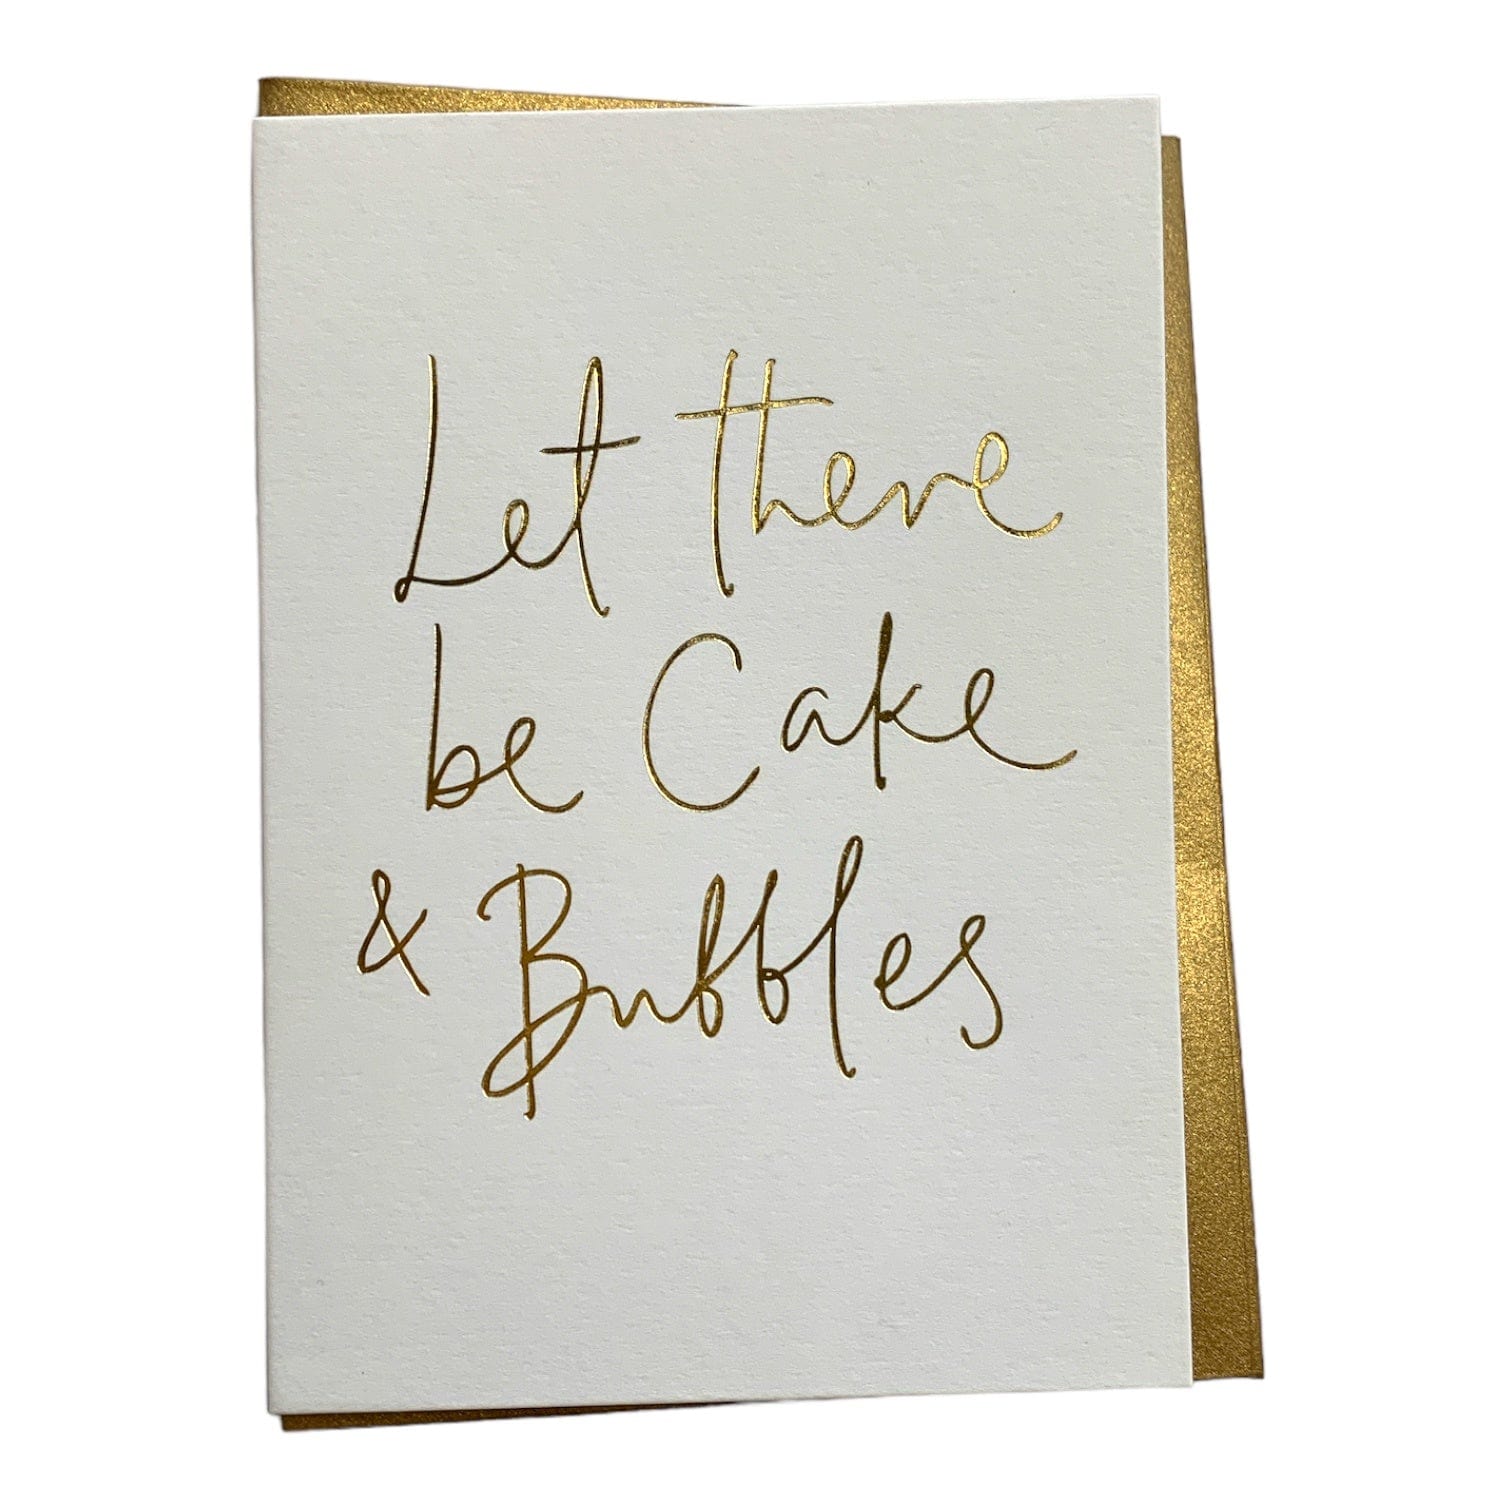 Let There Be Cake and Bubbles